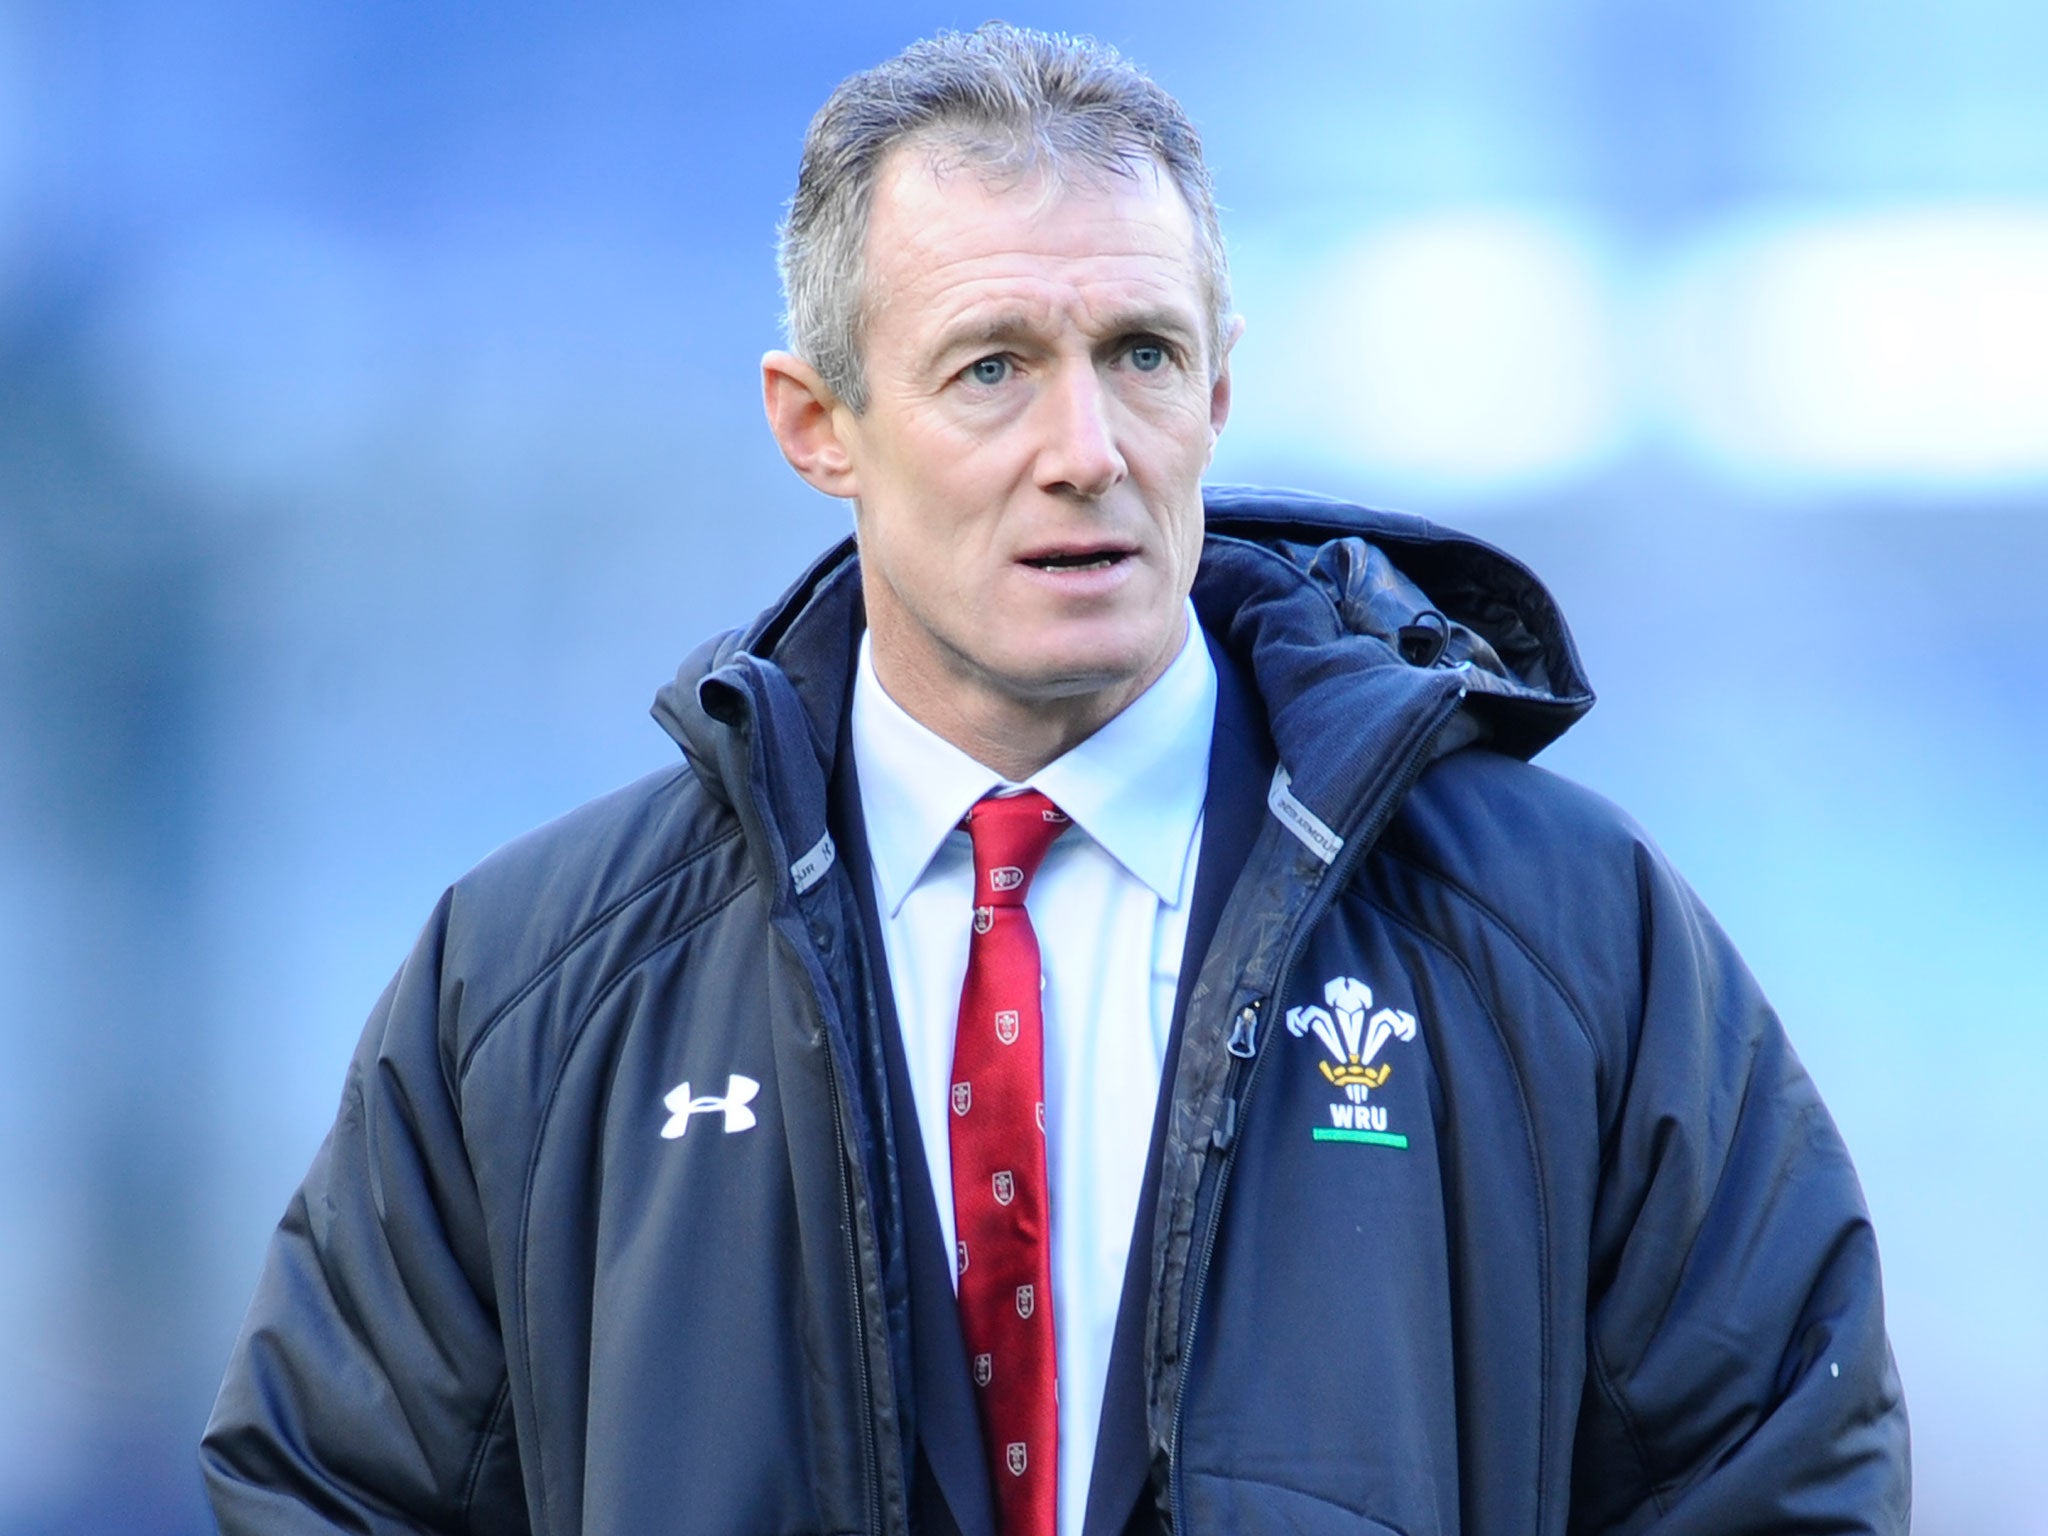 Wales assistant coach Rob Howley